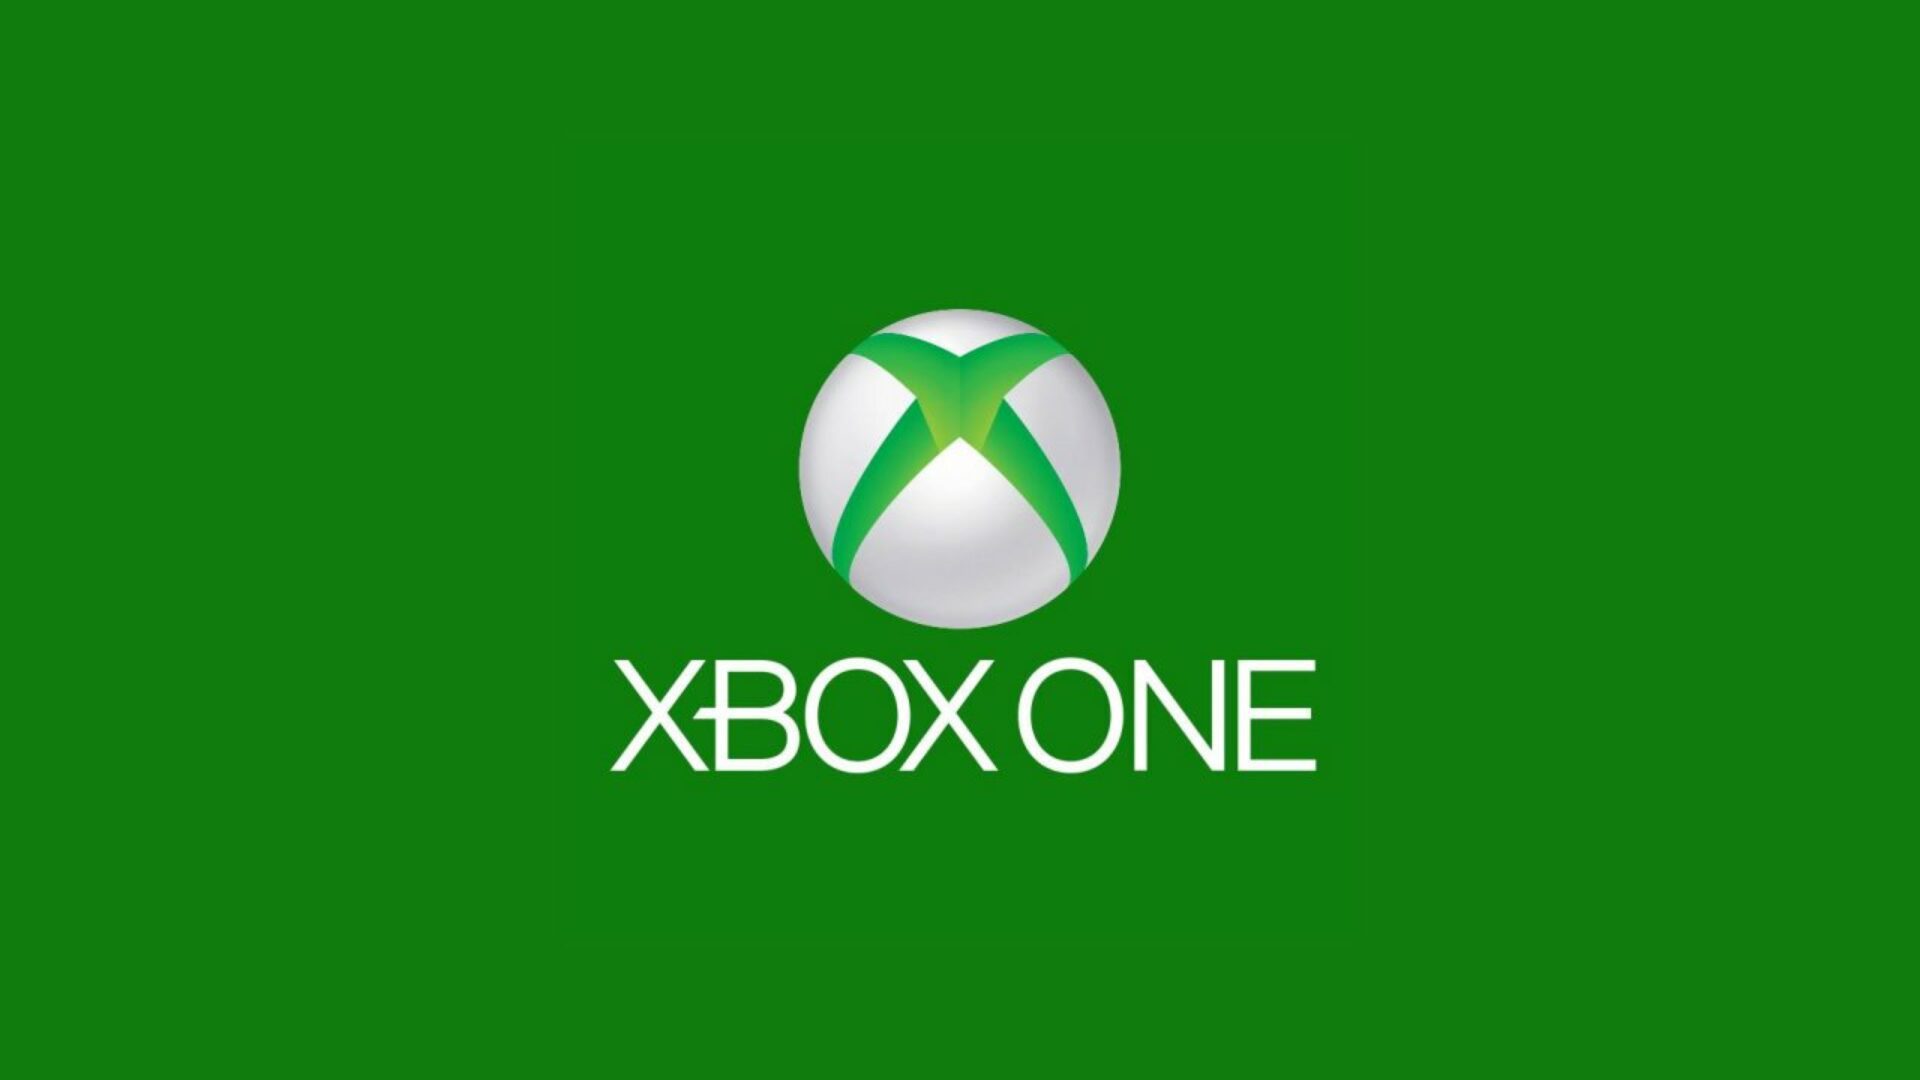 Noticing A Long Wait For The Xbox One Preview Program? There’s A Reason For That. . .